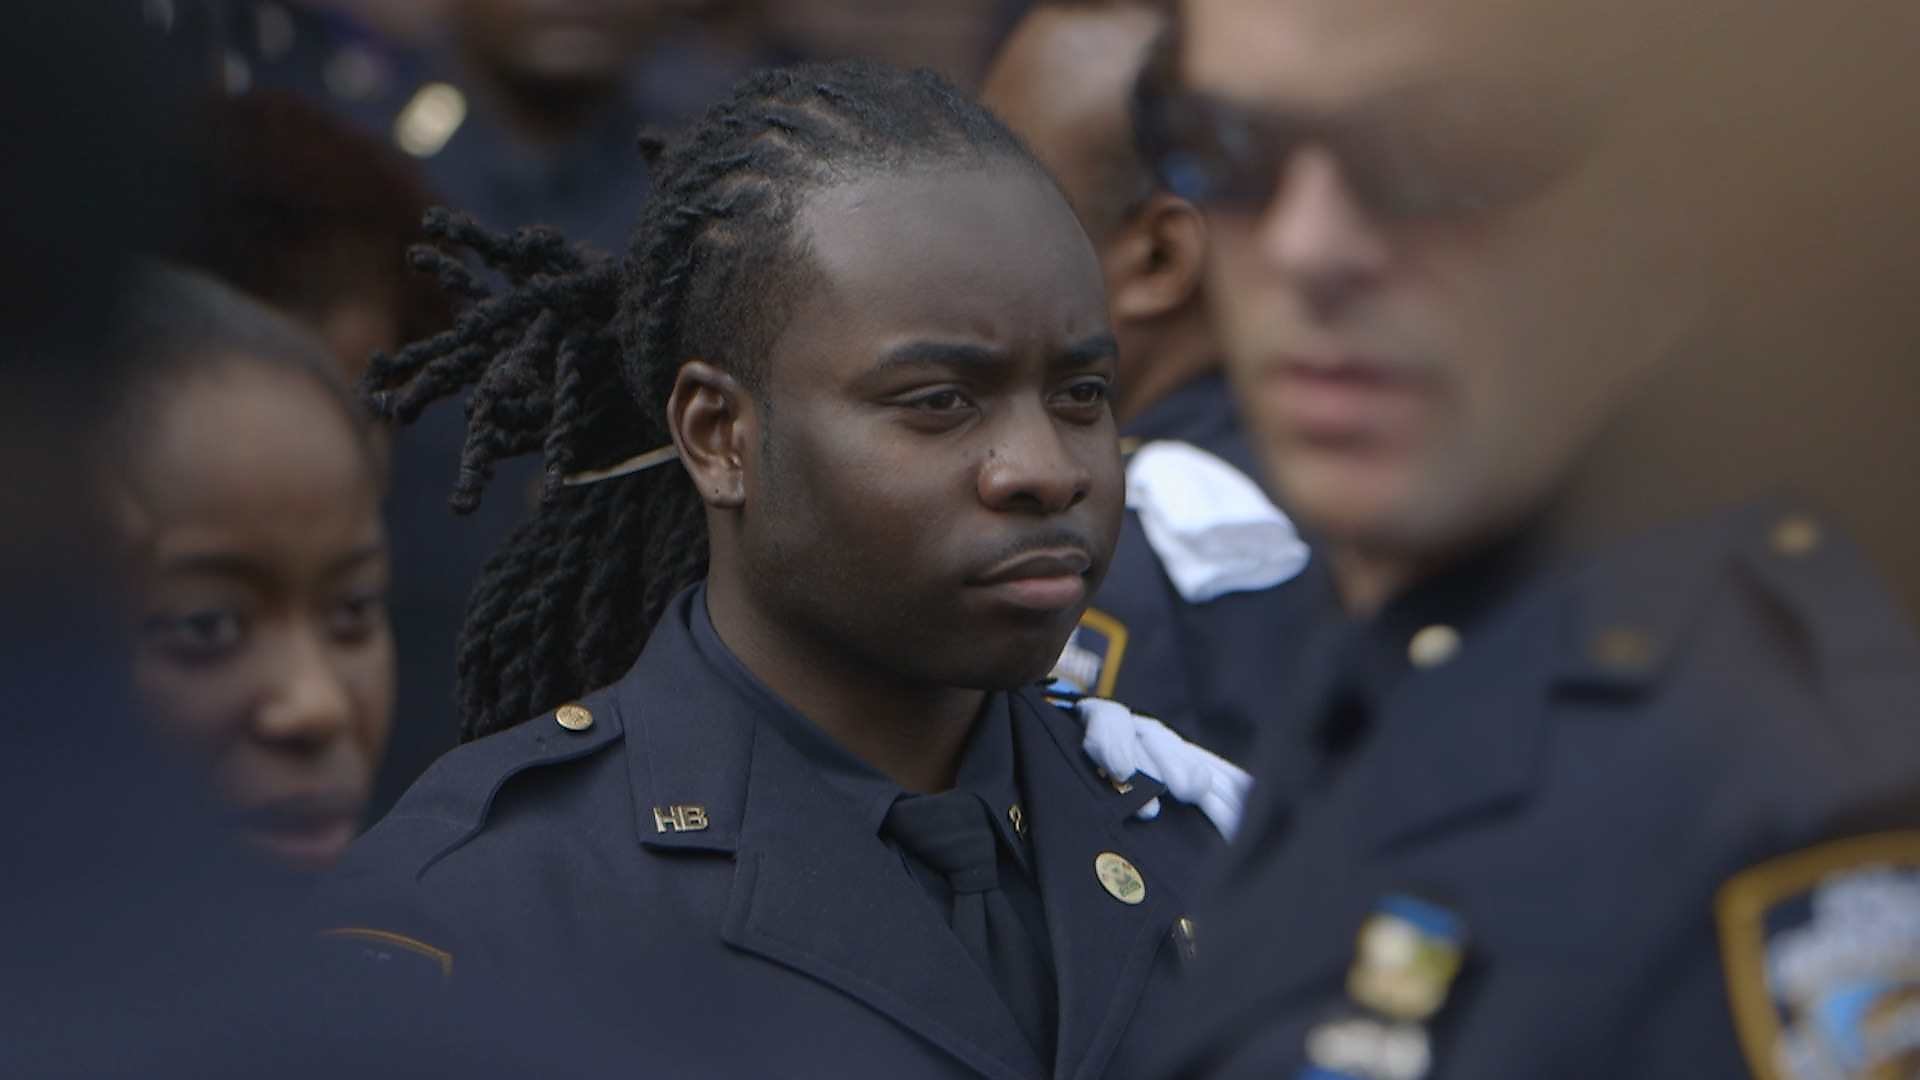 'Crime + Punishment’ a compelling look at alleged quotas in New York policing - SFGate1920 x 1080